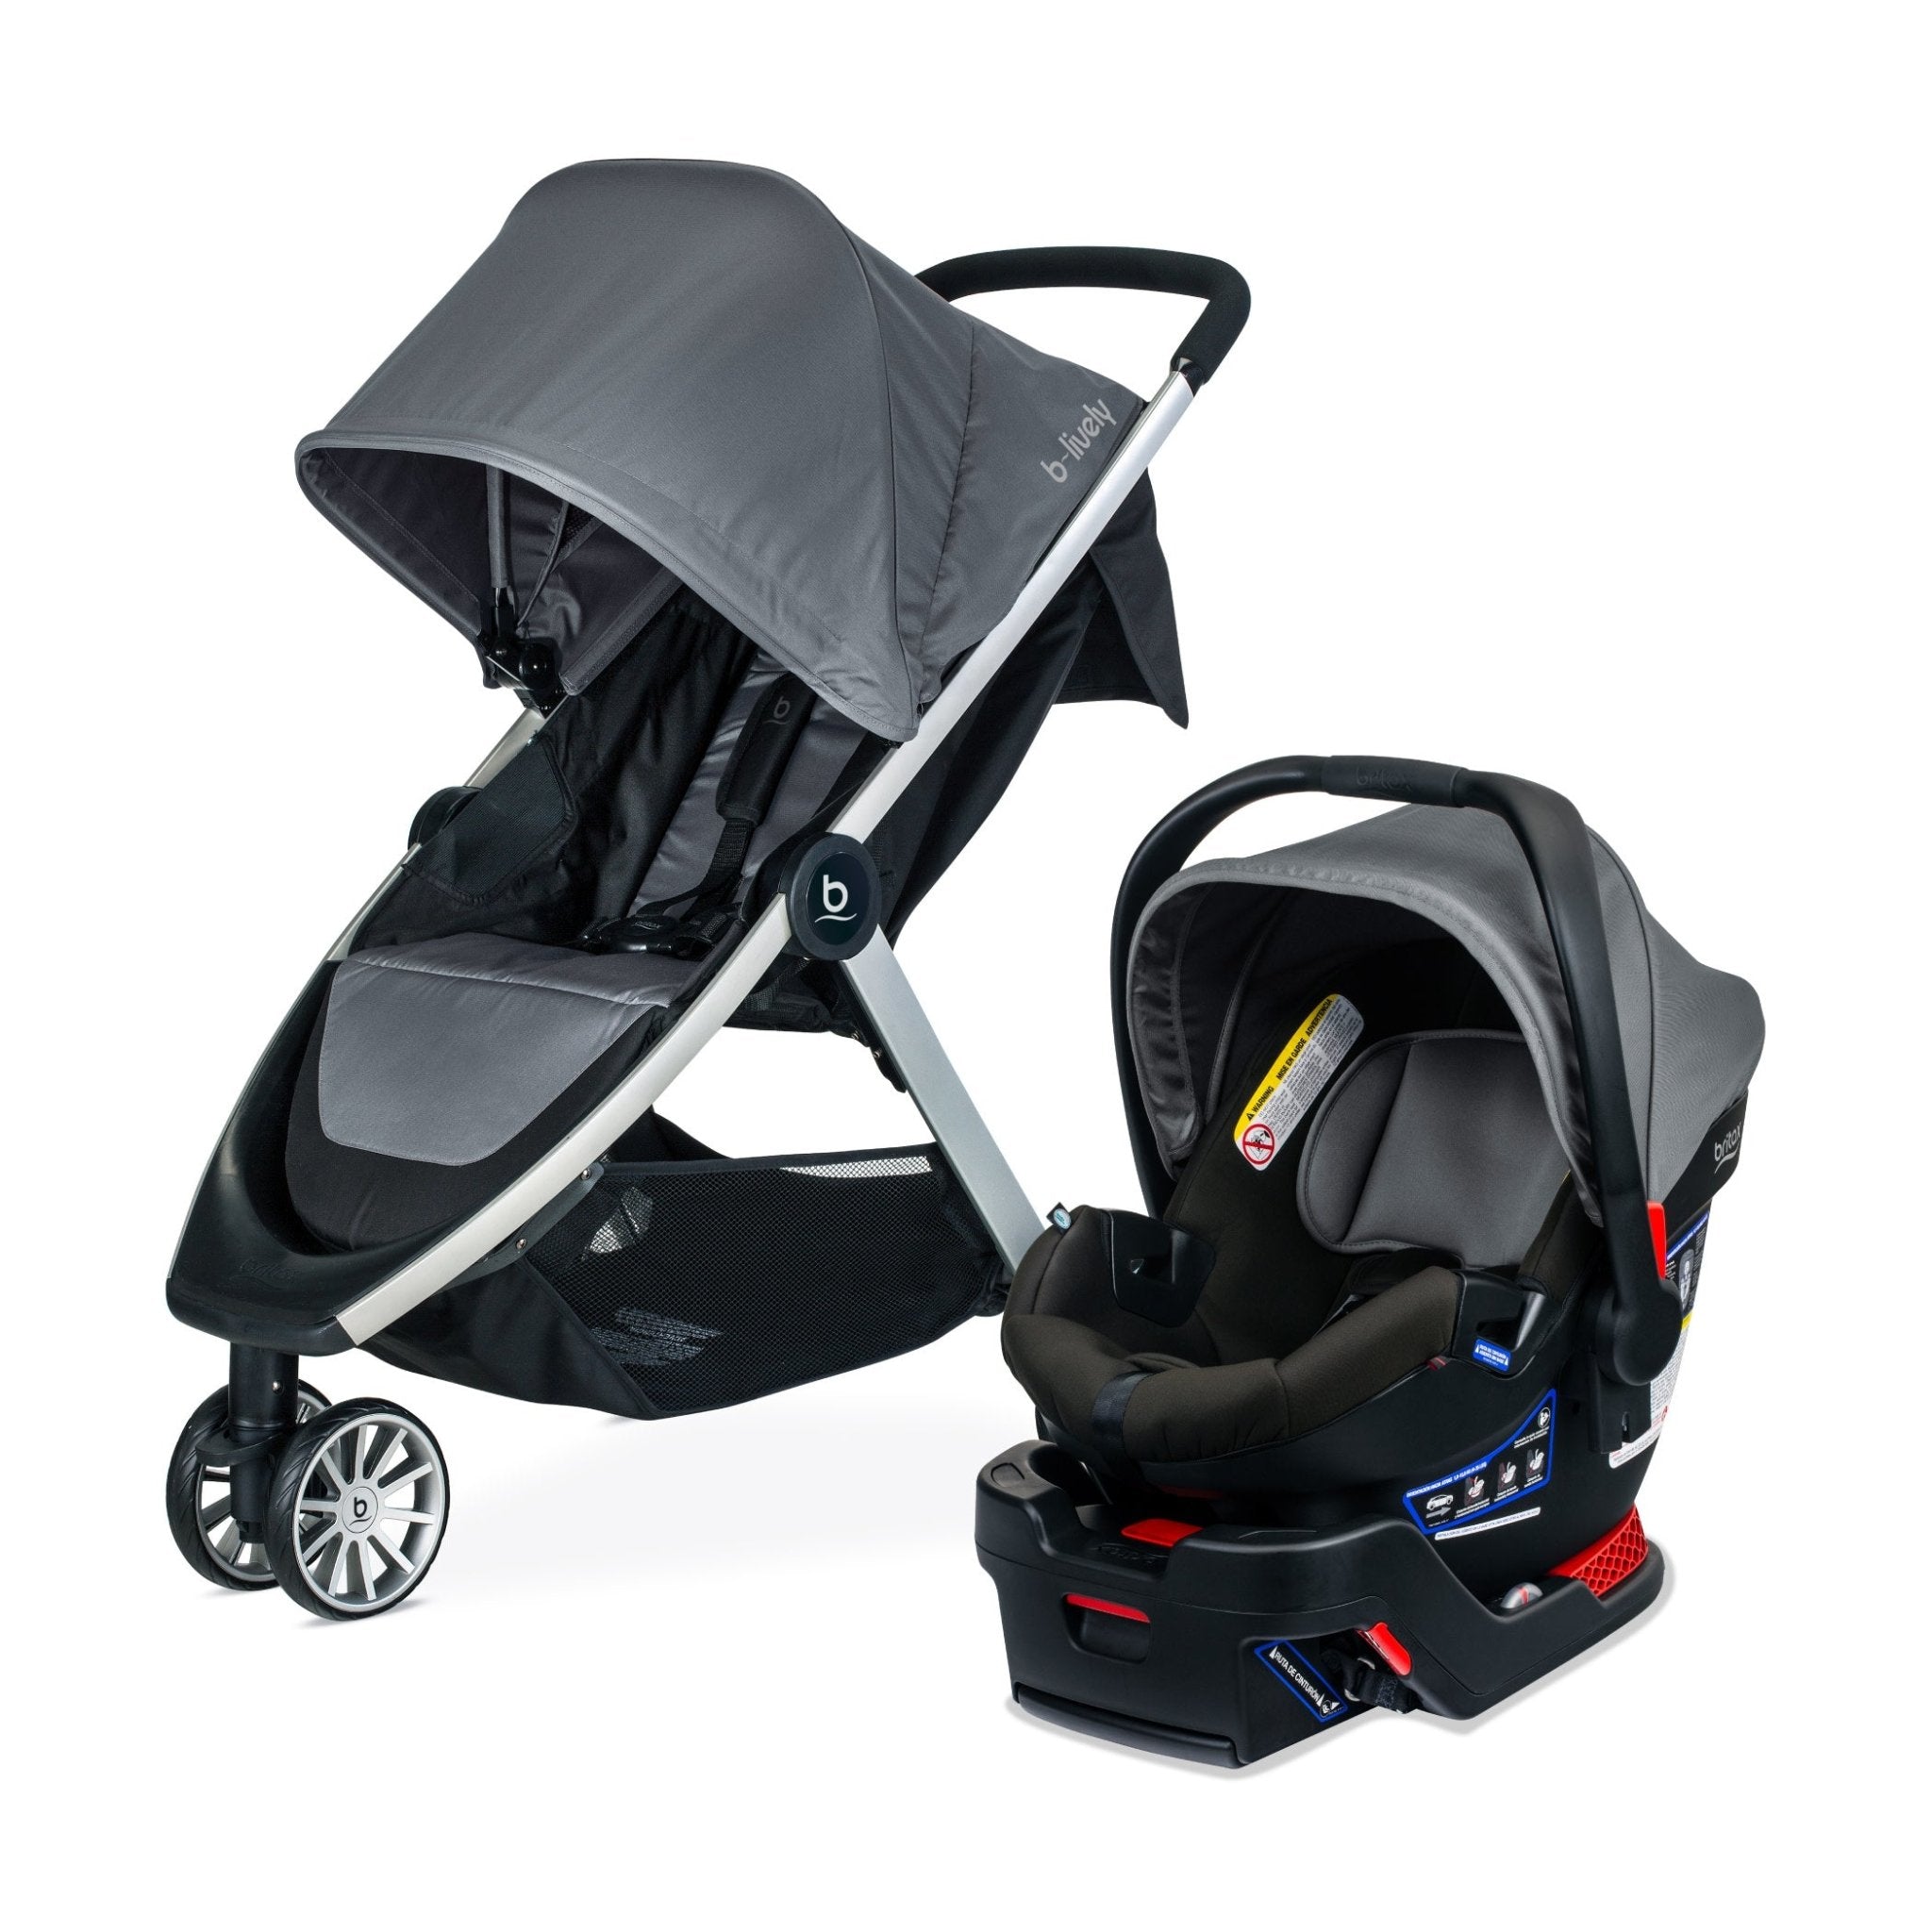 Britax B-Lively and B-Safe Gen2 Travel System - ANB Baby -$300 - $500